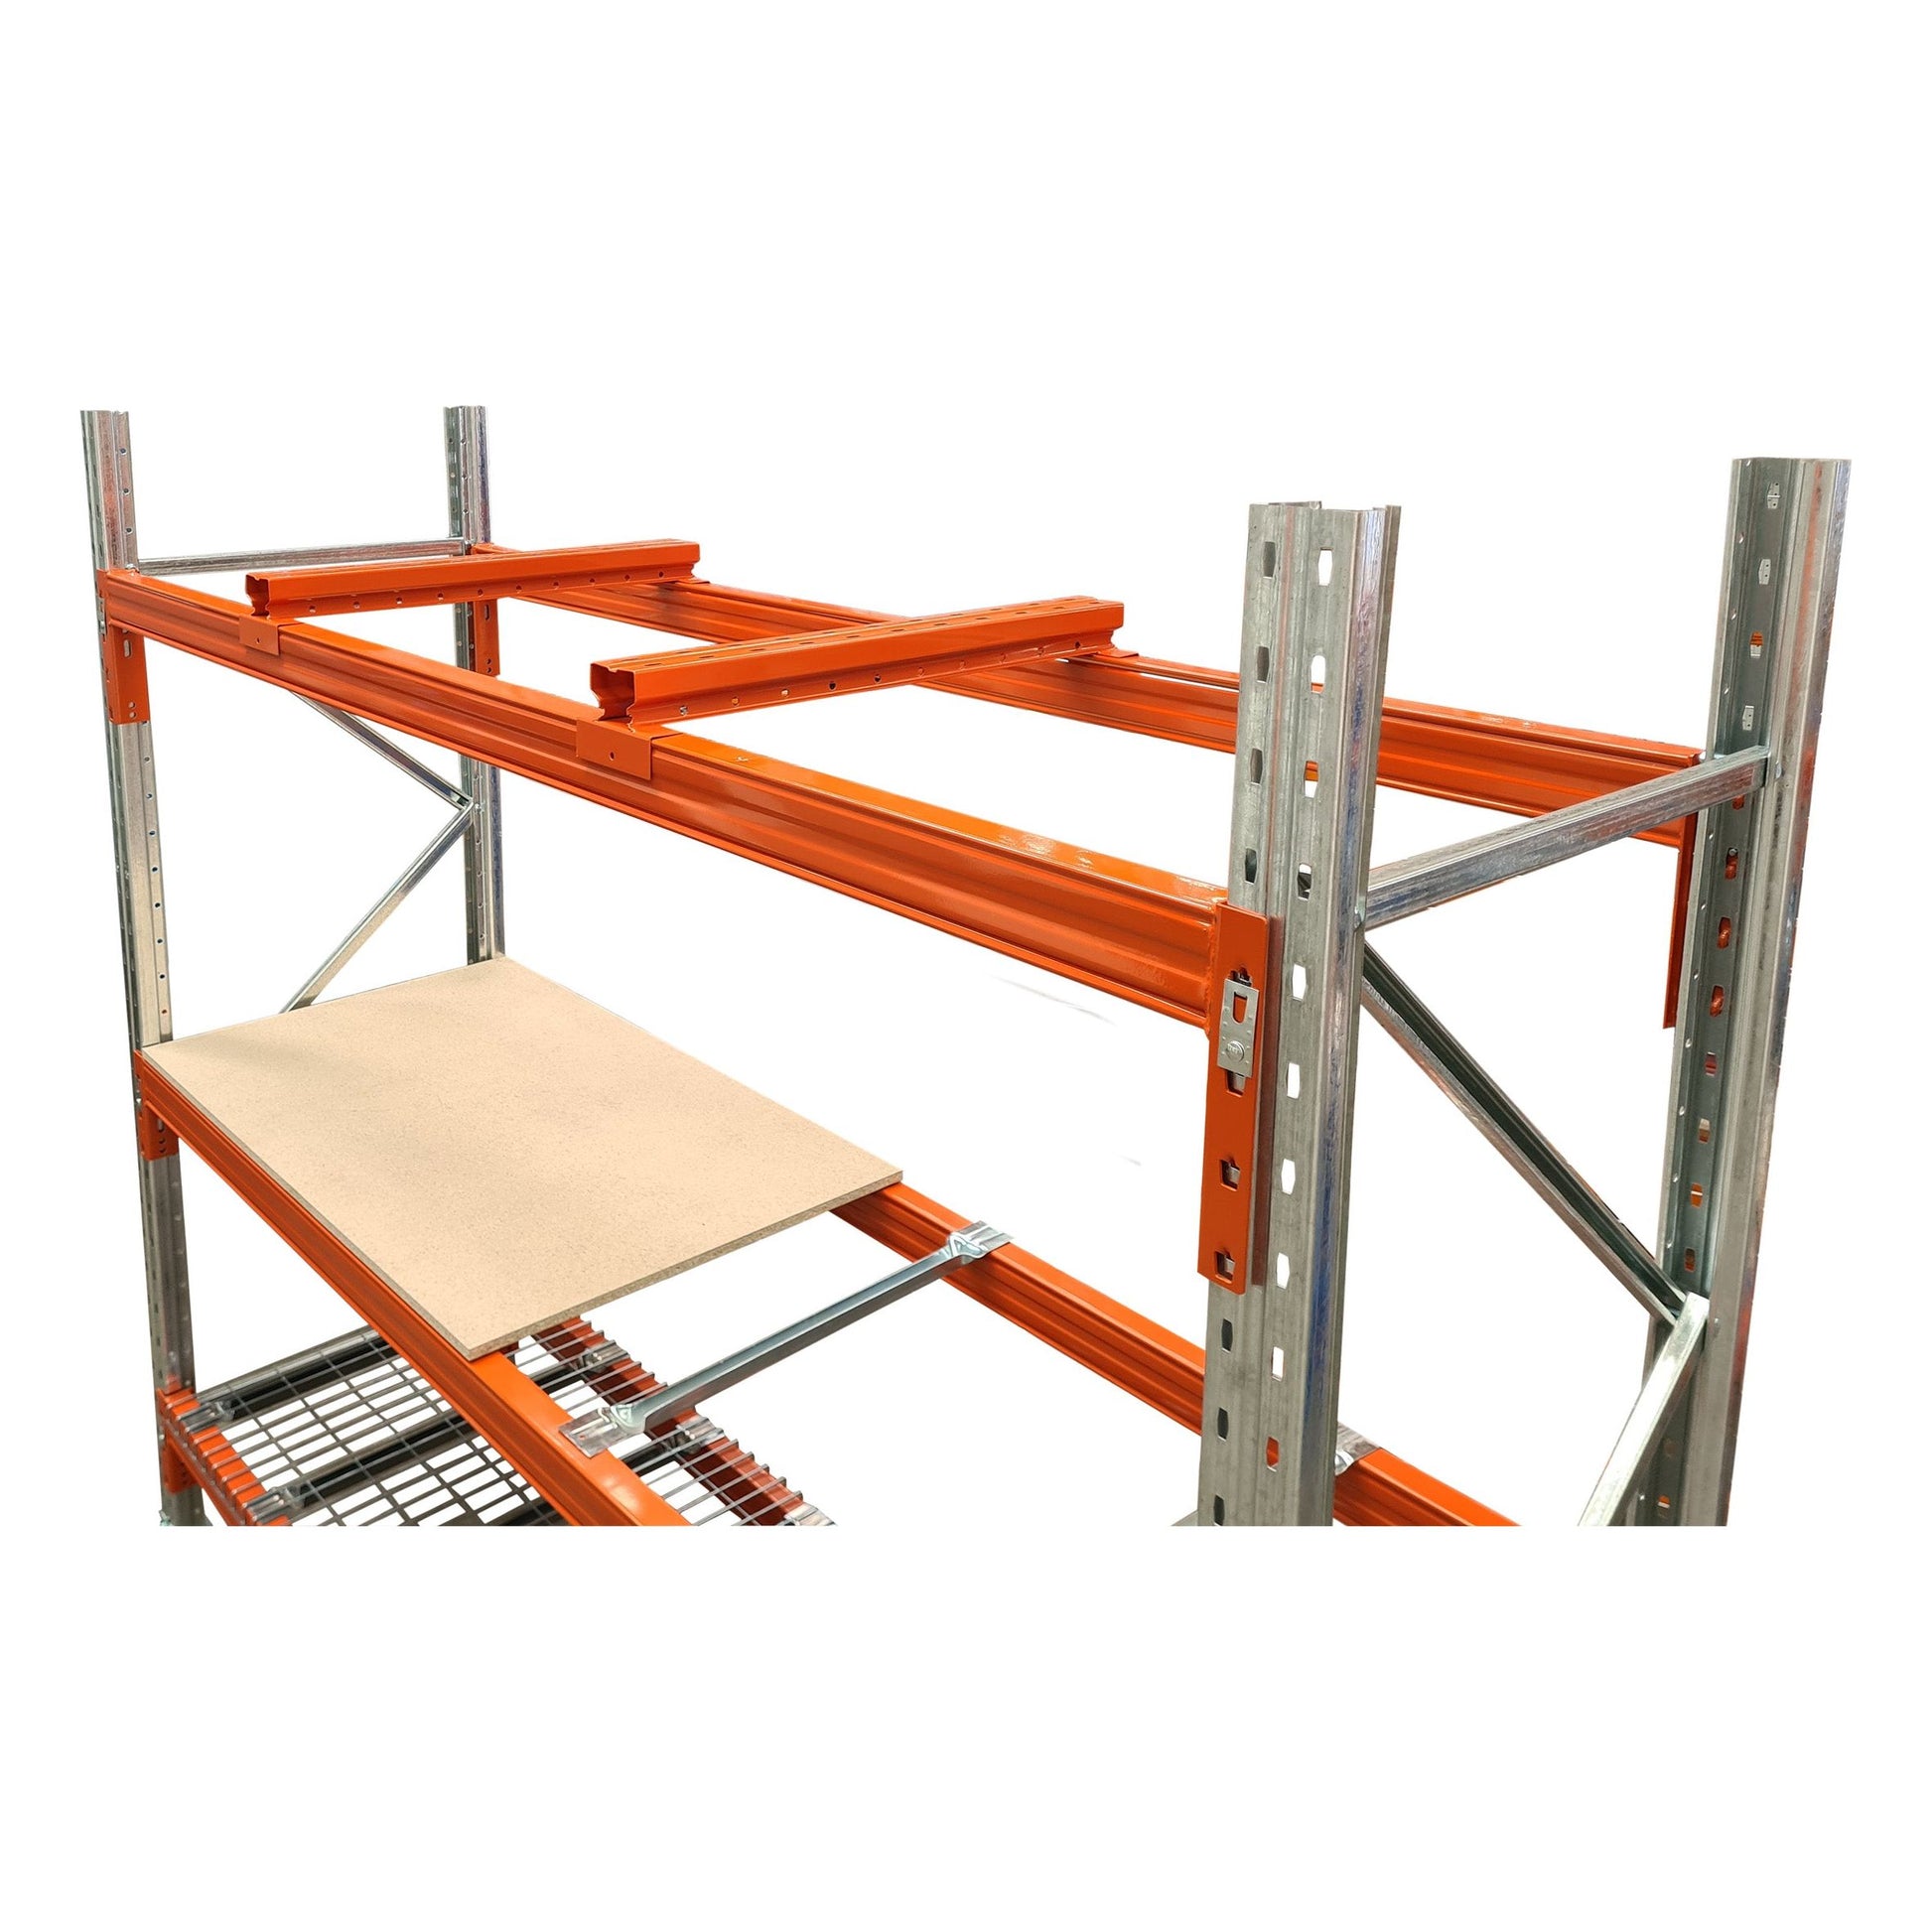 ReadyRack Chipboard 1500x835x18 to suit 1524mm Beam length